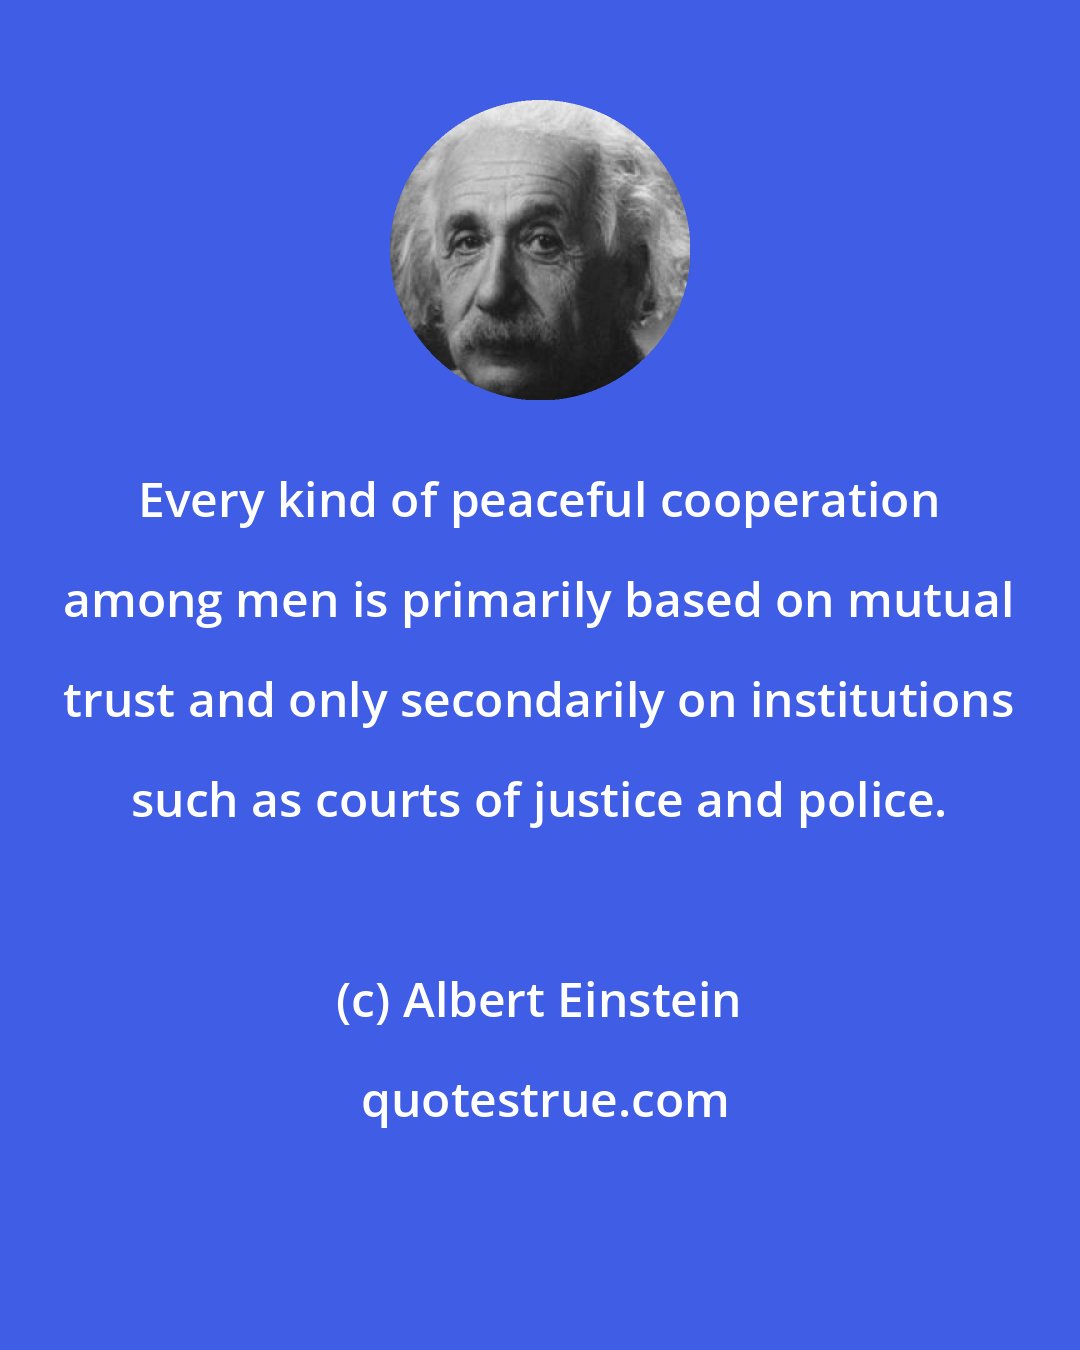 Albert Einstein: Every kind of peaceful cooperation among men is primarily based on mutual trust and only secondarily on institutions such as courts of justice and police.